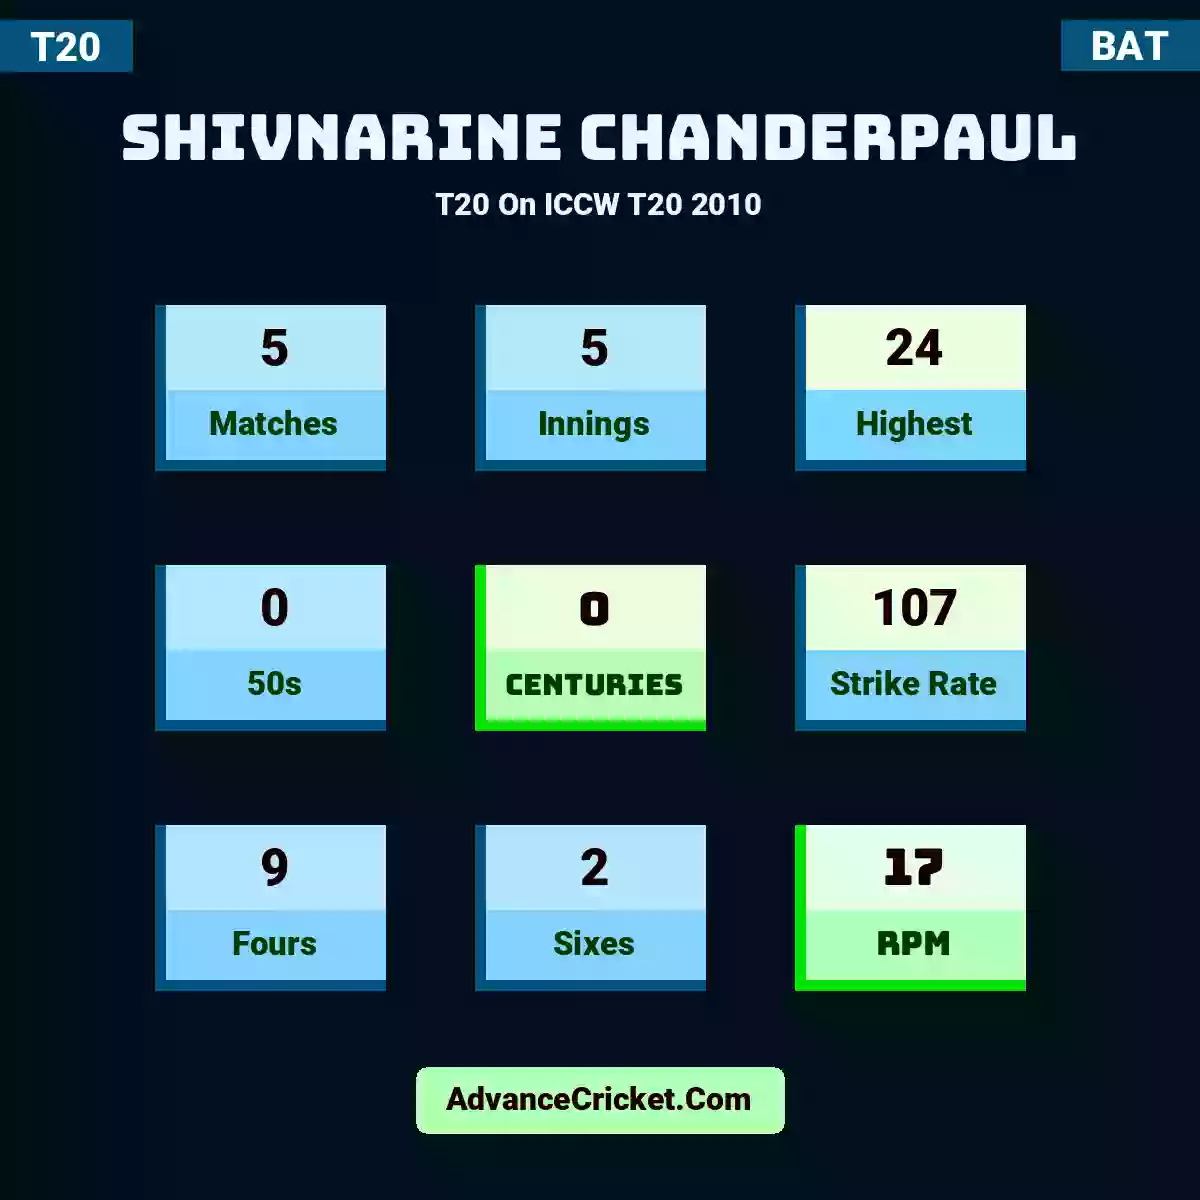 Shivnarine Chanderpaul T20  On ICCW T20 2010, Shivnarine Chanderpaul played 5 matches, scored 24 runs as highest, 0 half-centuries, and 0 centuries, with a strike rate of 107. S.Chanderpaul hit 9 fours and 2 sixes, with an RPM of 17.